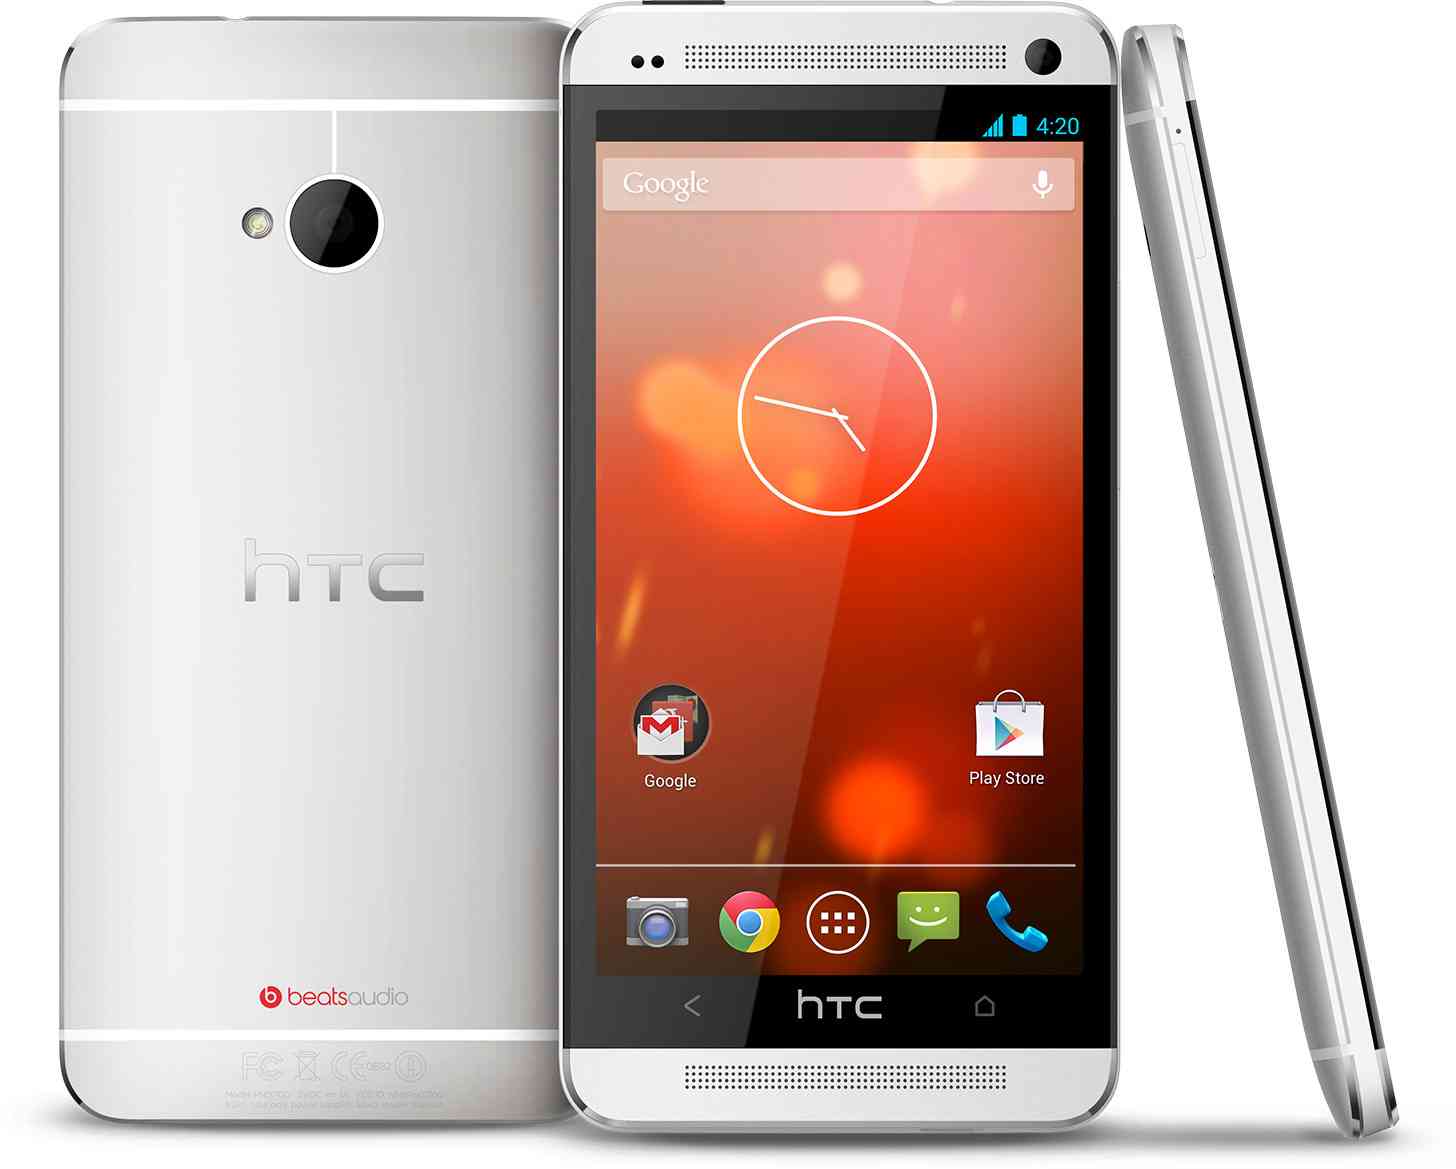 HTC One M7 Google Play edition large